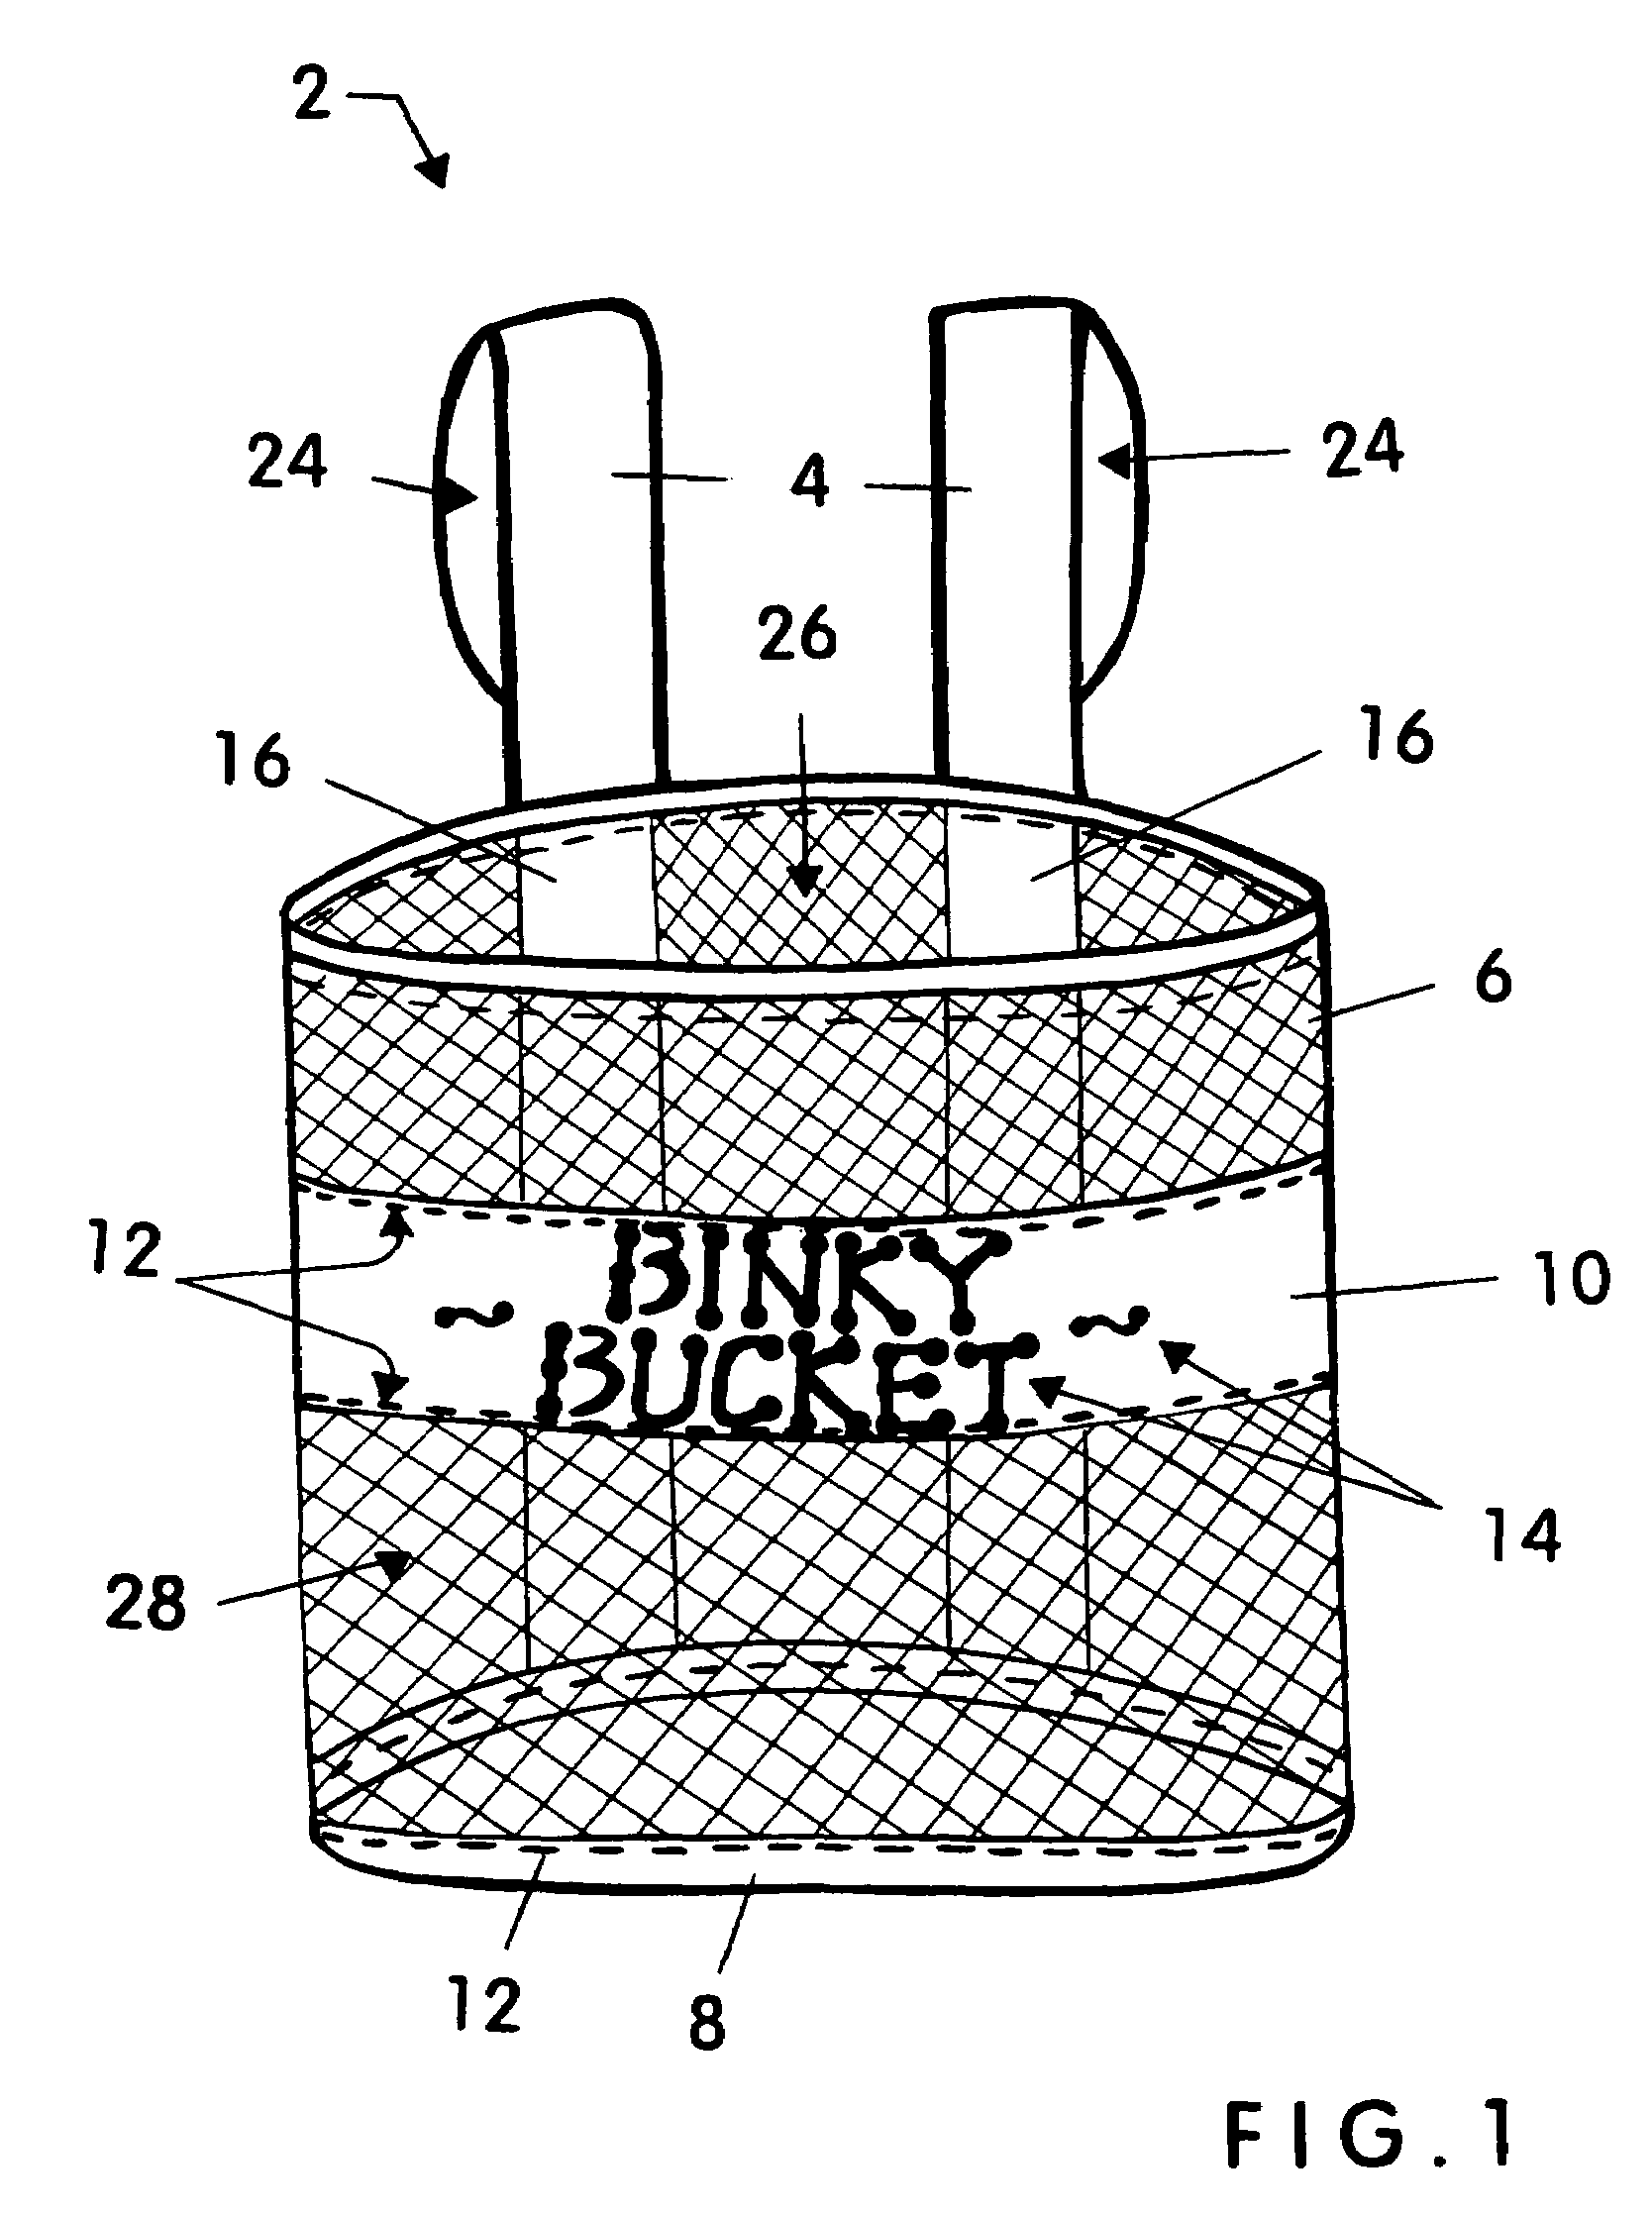 Portable container for temporary storage of small objects used with infants and children